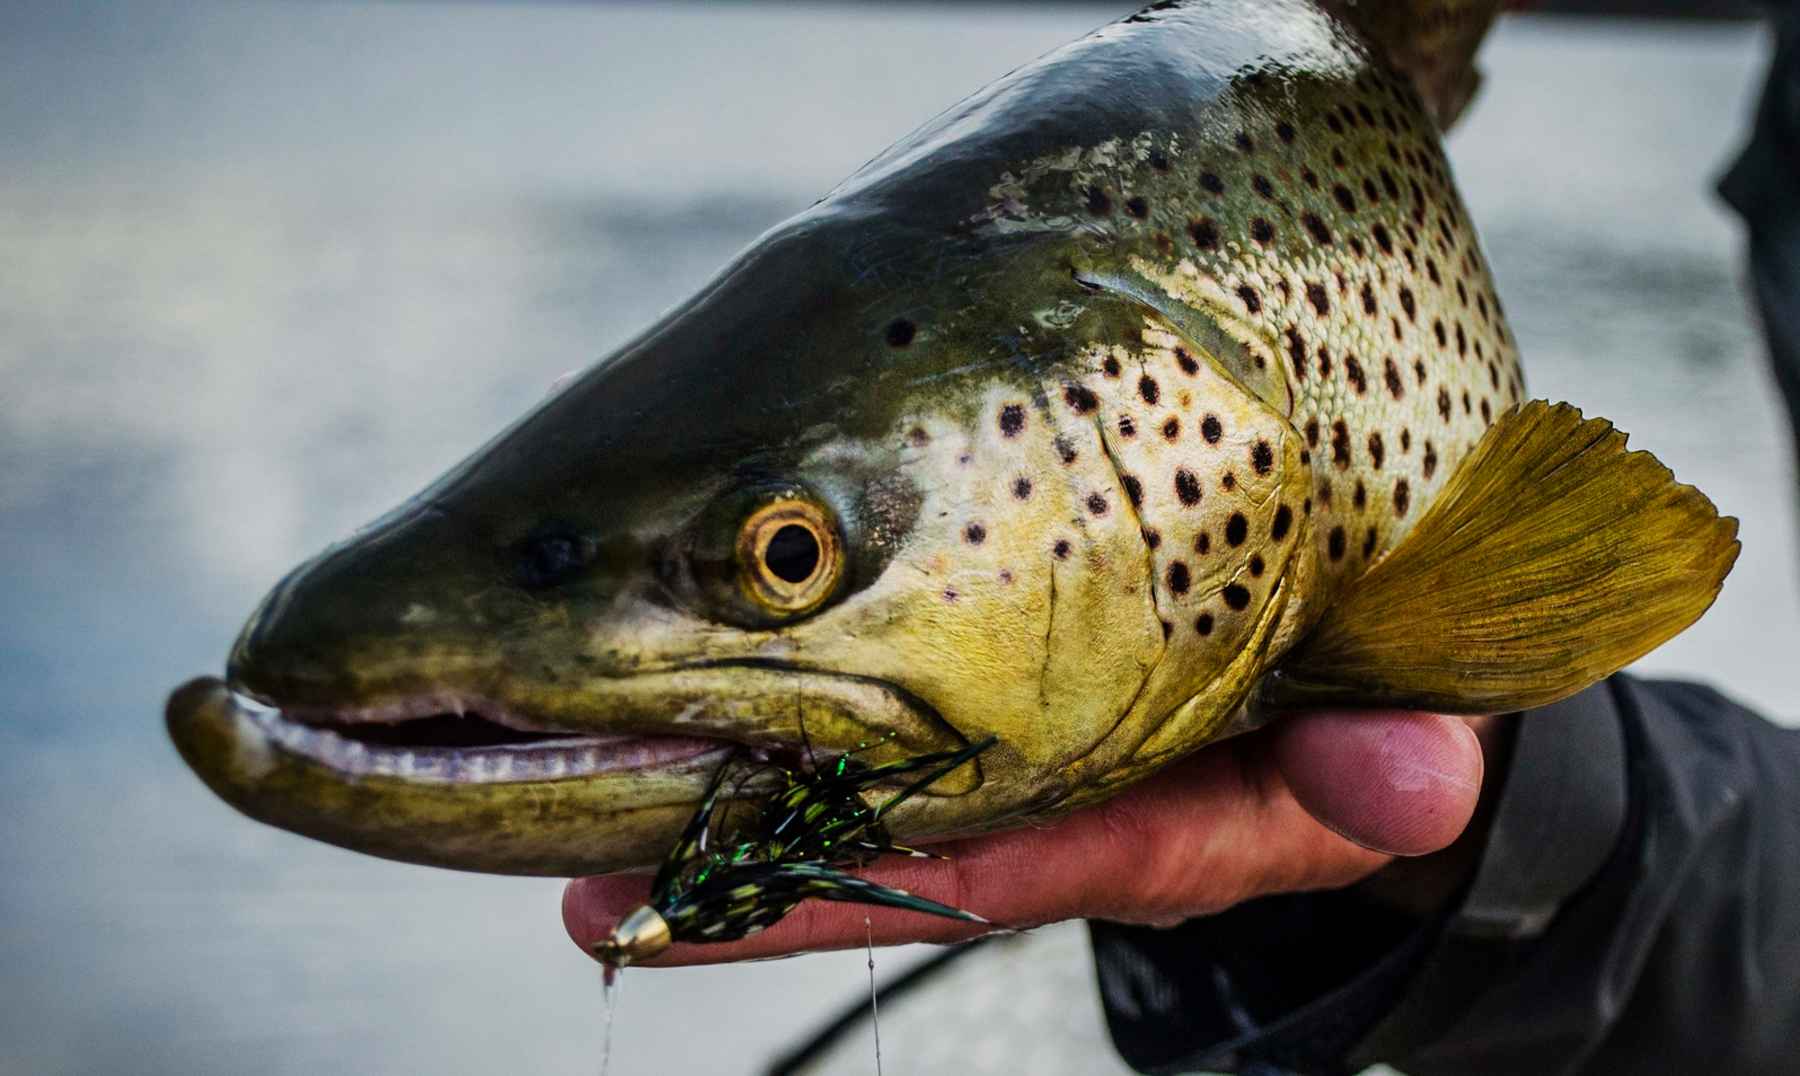 http://www.hatchmag.com/sites/default/files/styles/extra-large/public/field/image/5streamertips.jpg